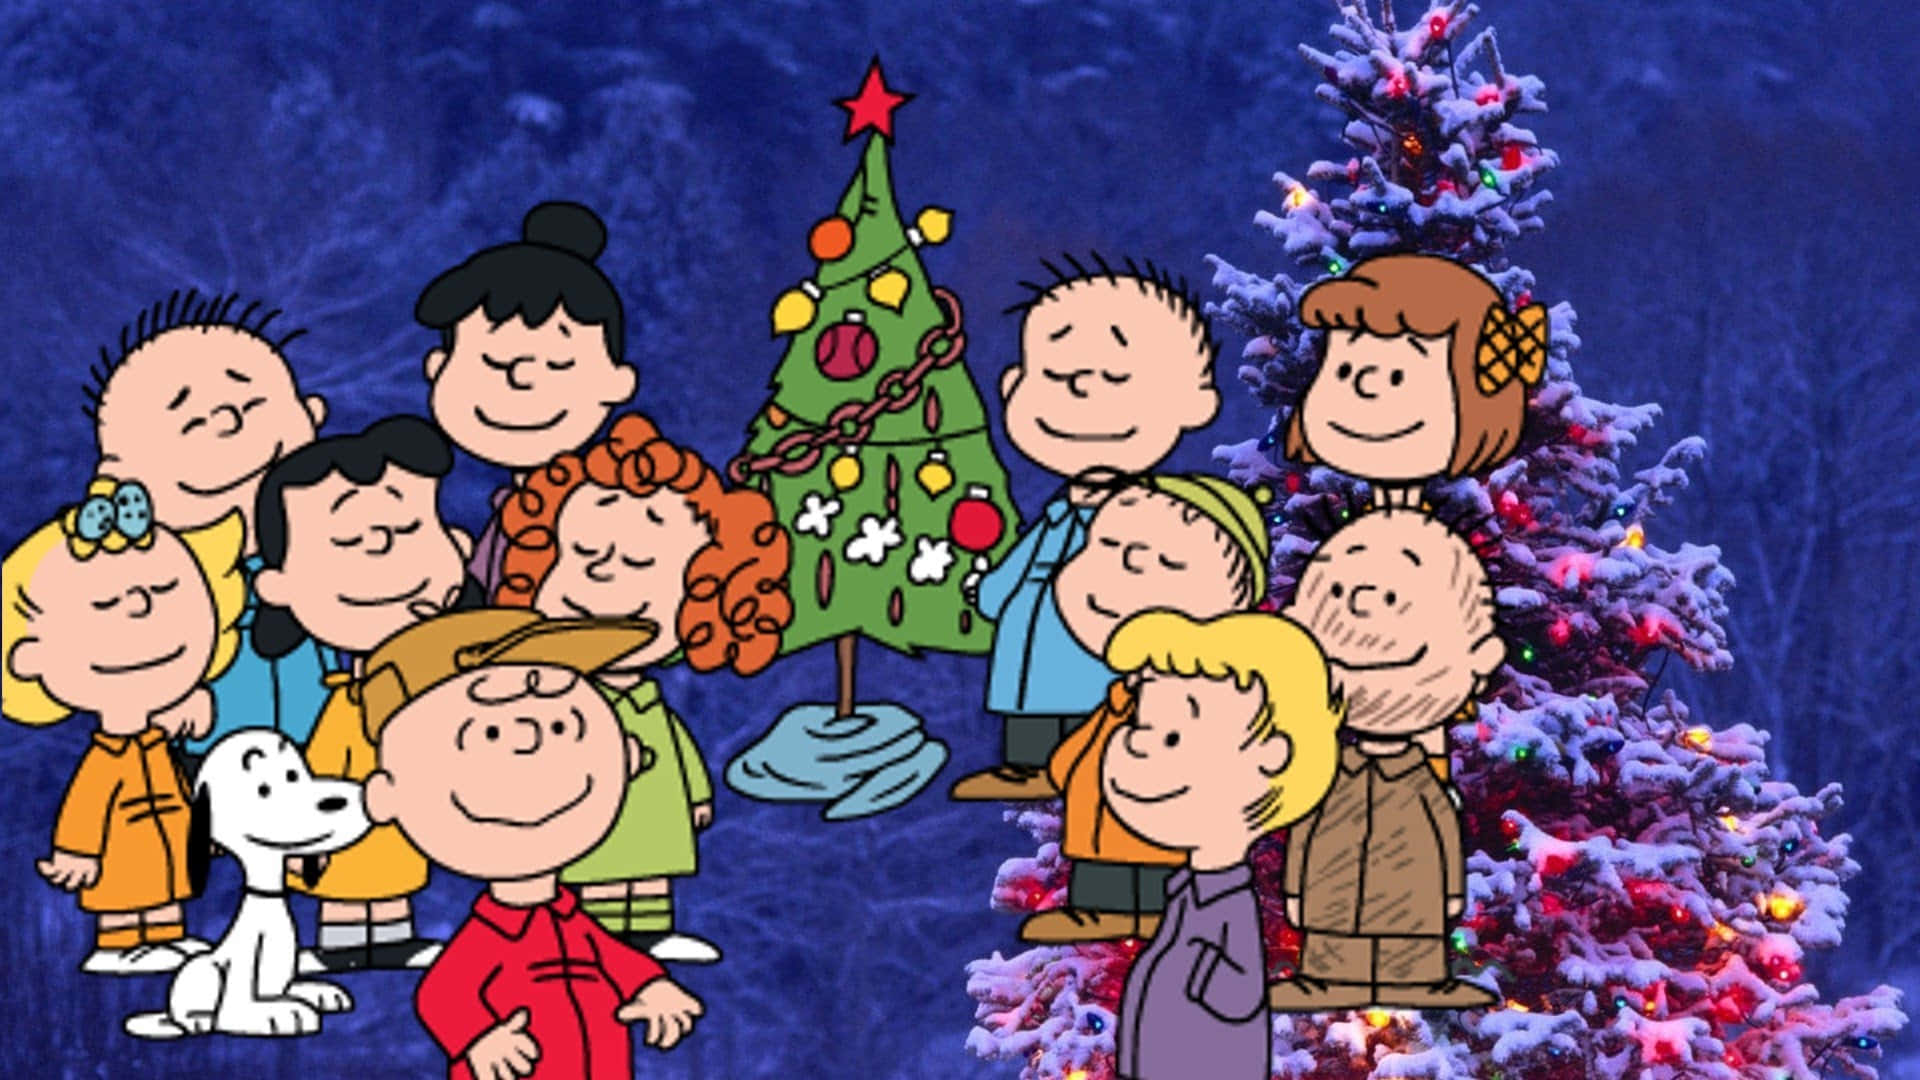 Charlie Brown And The Gang Enjoying A Christmas Eve Complete With A Tree And Presents! Background